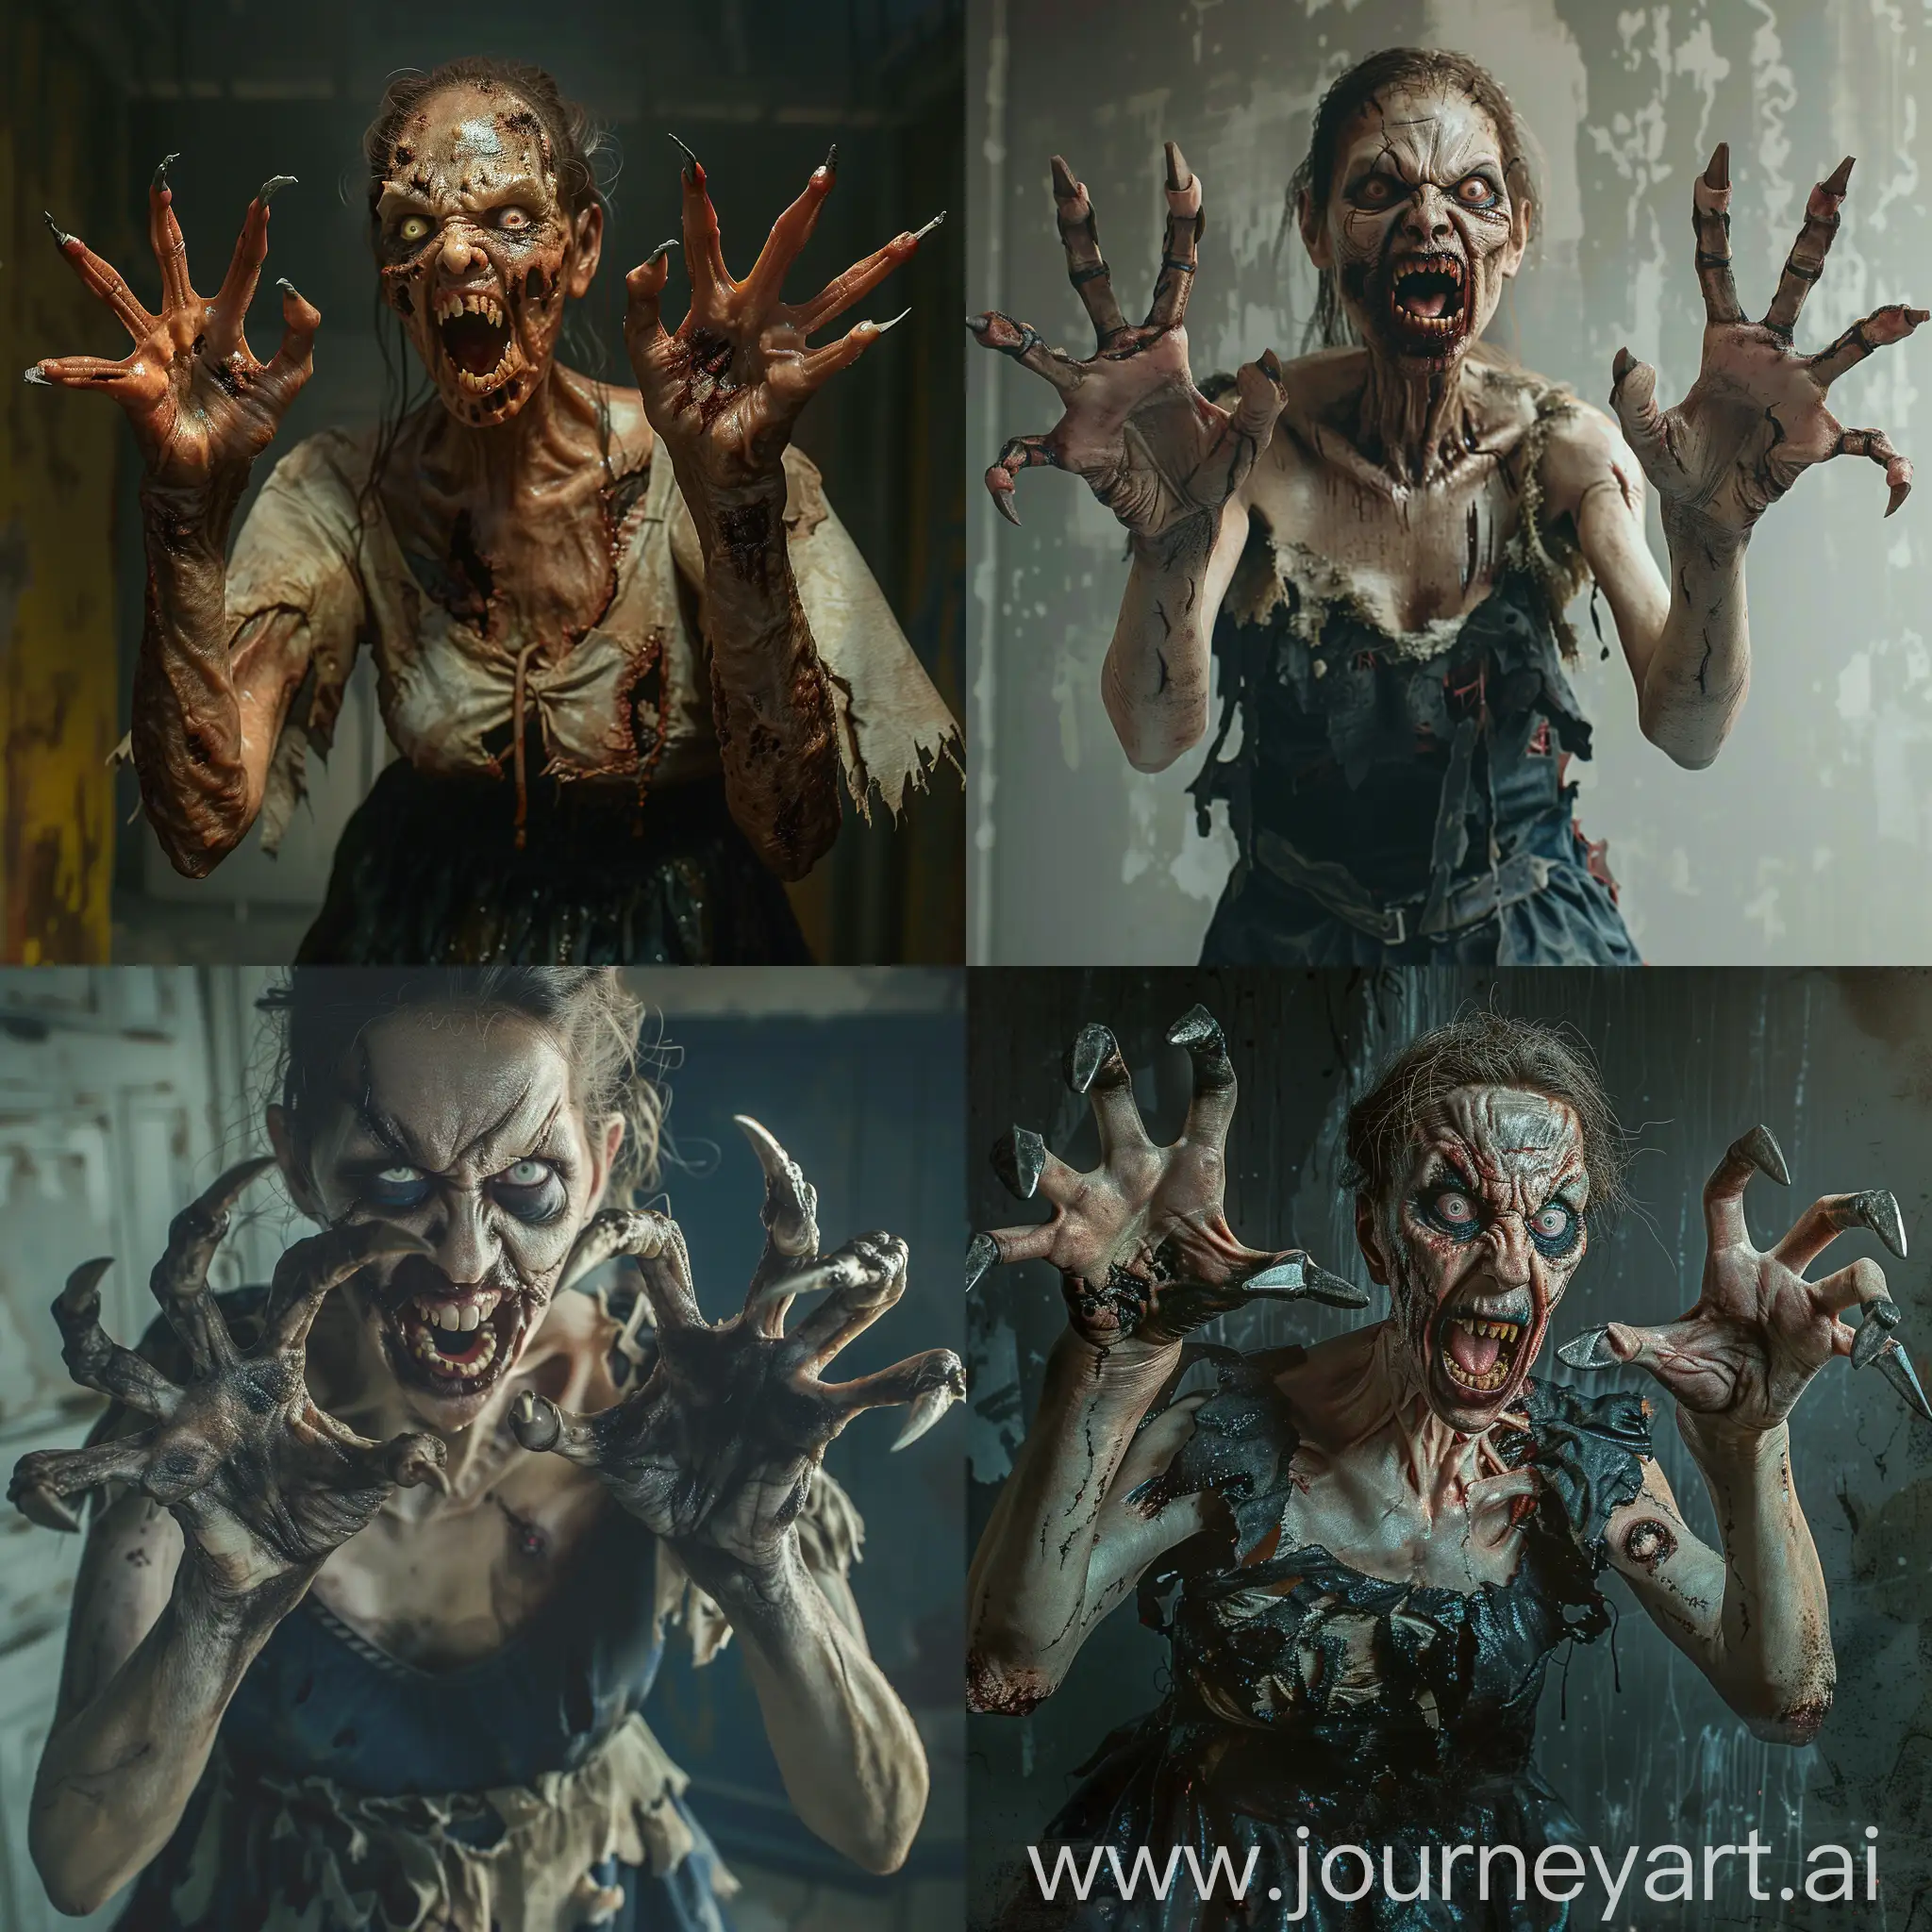 Menacing-Zombie-Woman-with-Clawed-Hands-in-HyperRealistic-Horror-Photography